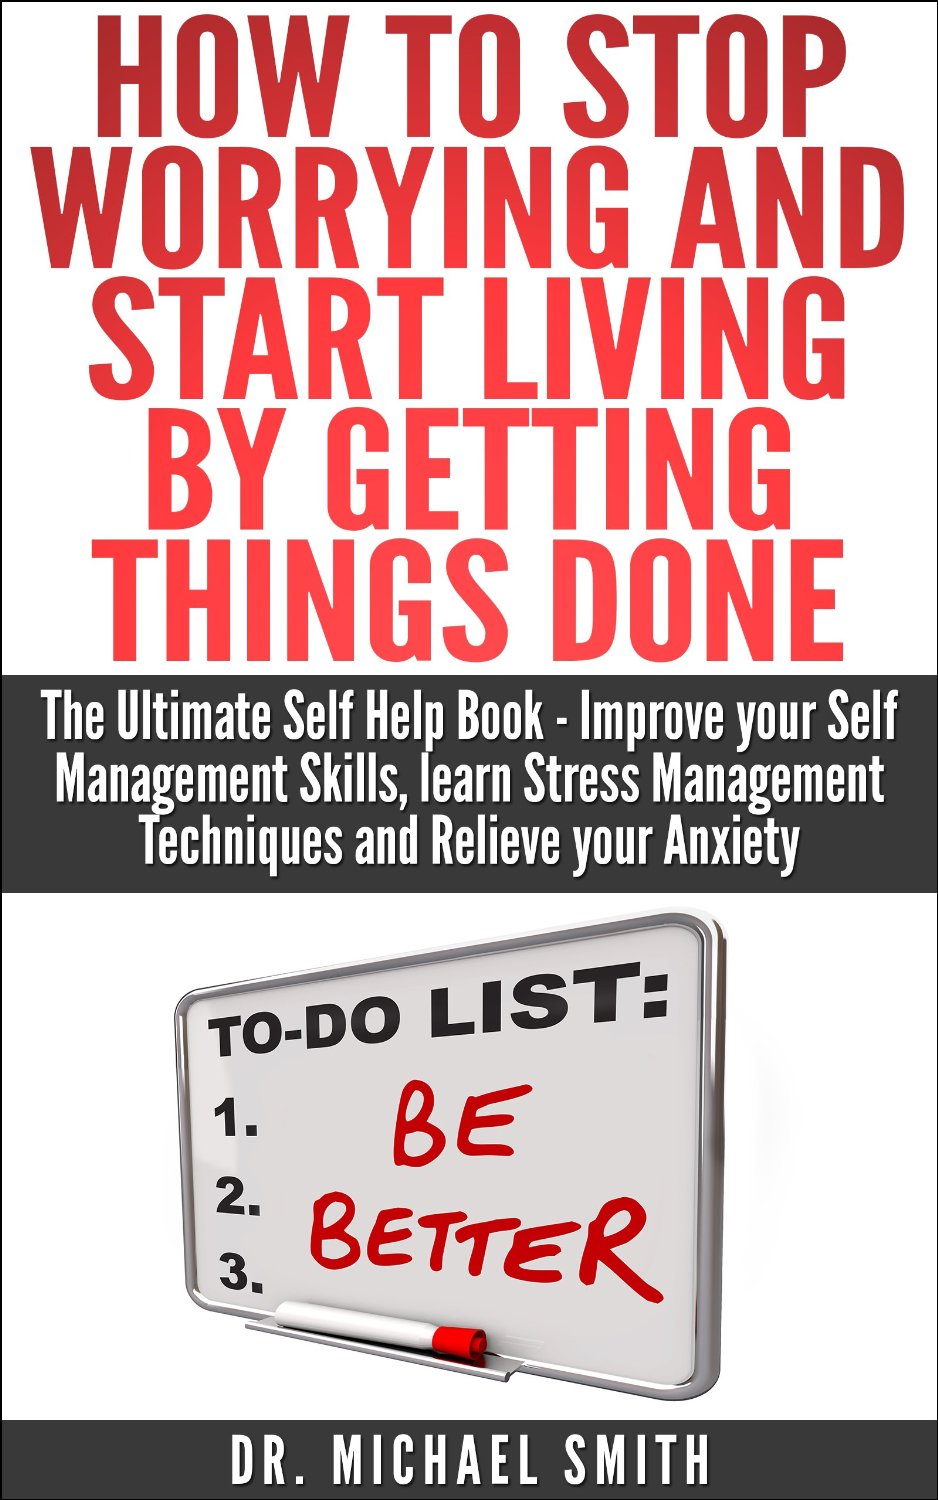 How to Stop Worrying and Start Living by Getting Things Done: The   Ultimate Self Help Book – Improve your Self Management Skills, learn   Stress Management Techniques and Relieve your Anxiety by Dr. Michael Smith